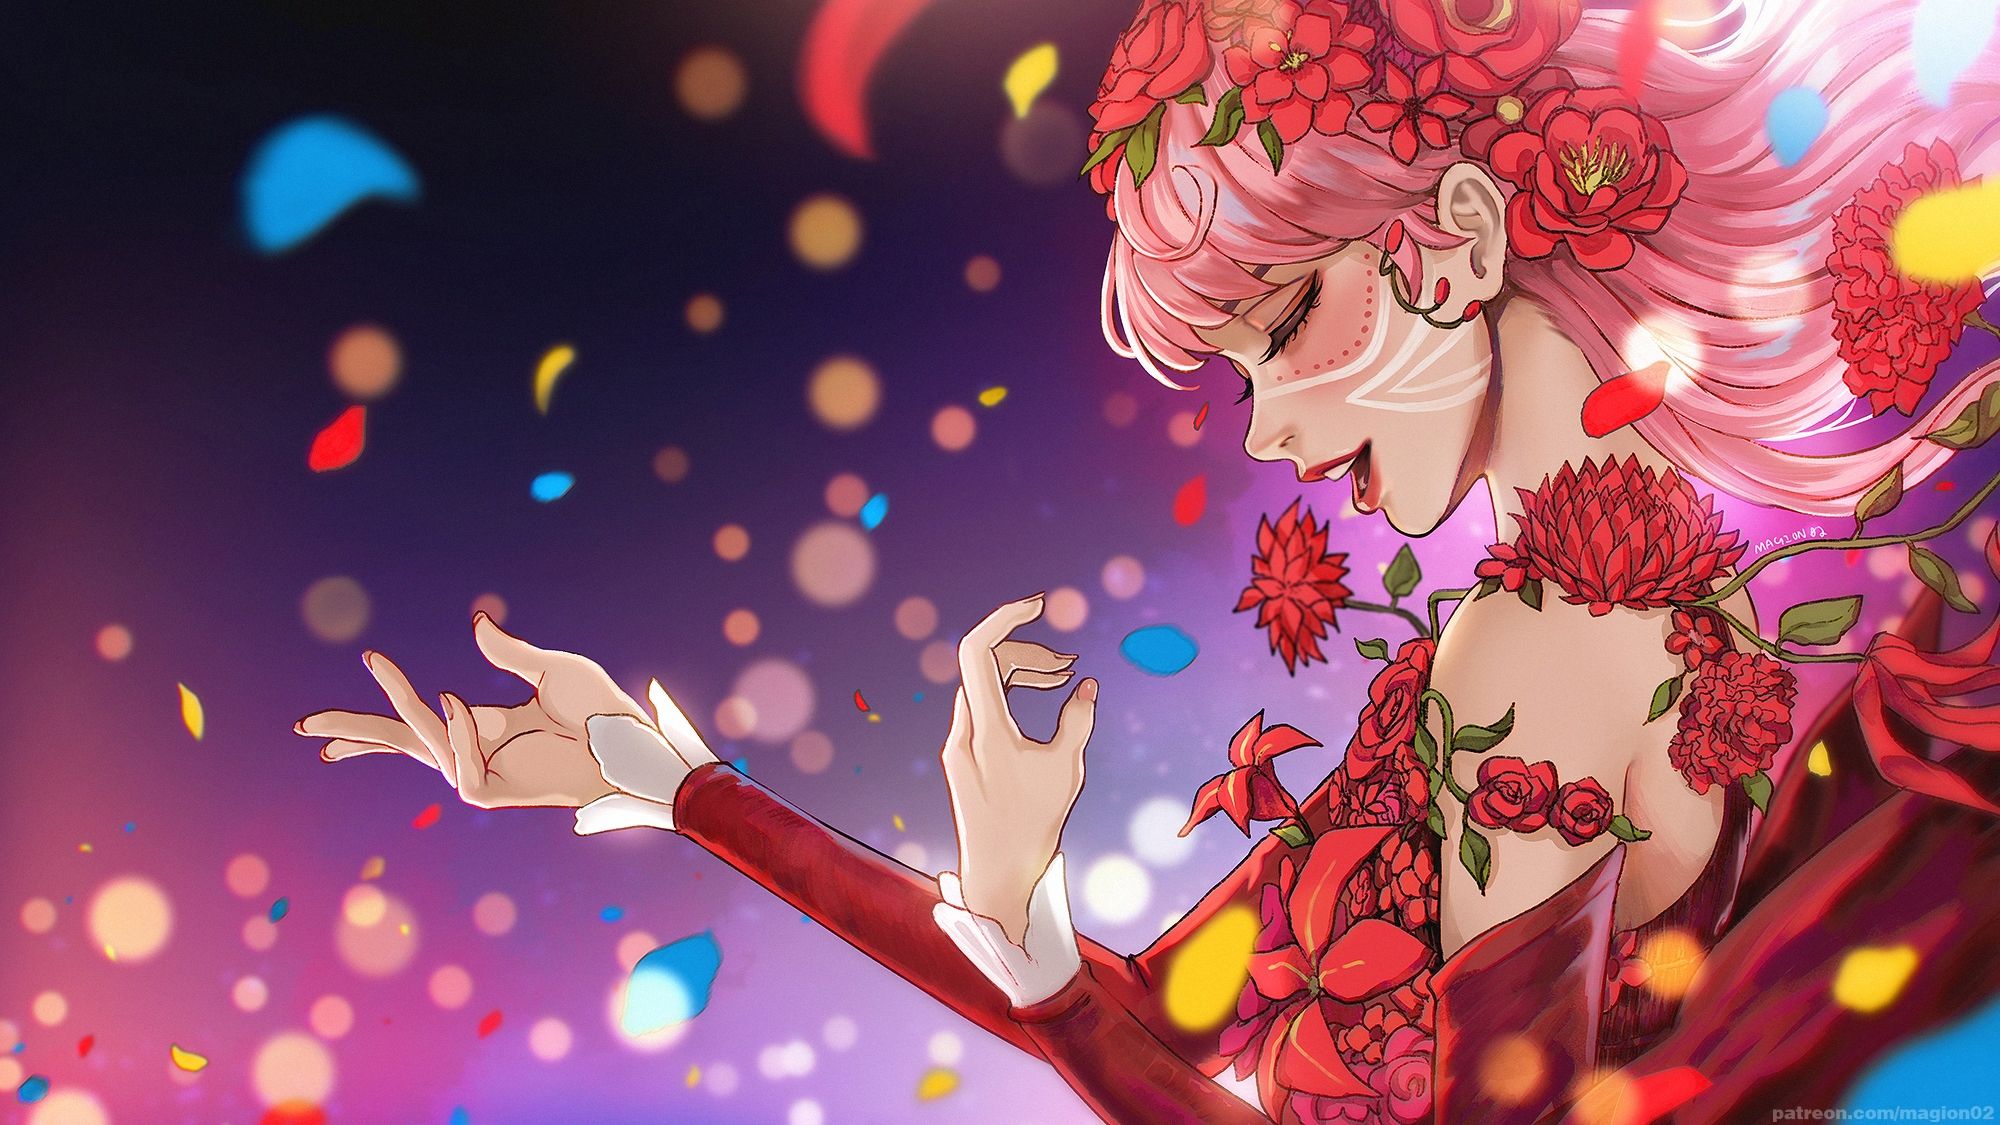 A girl with pink hair and red flowers - Belle